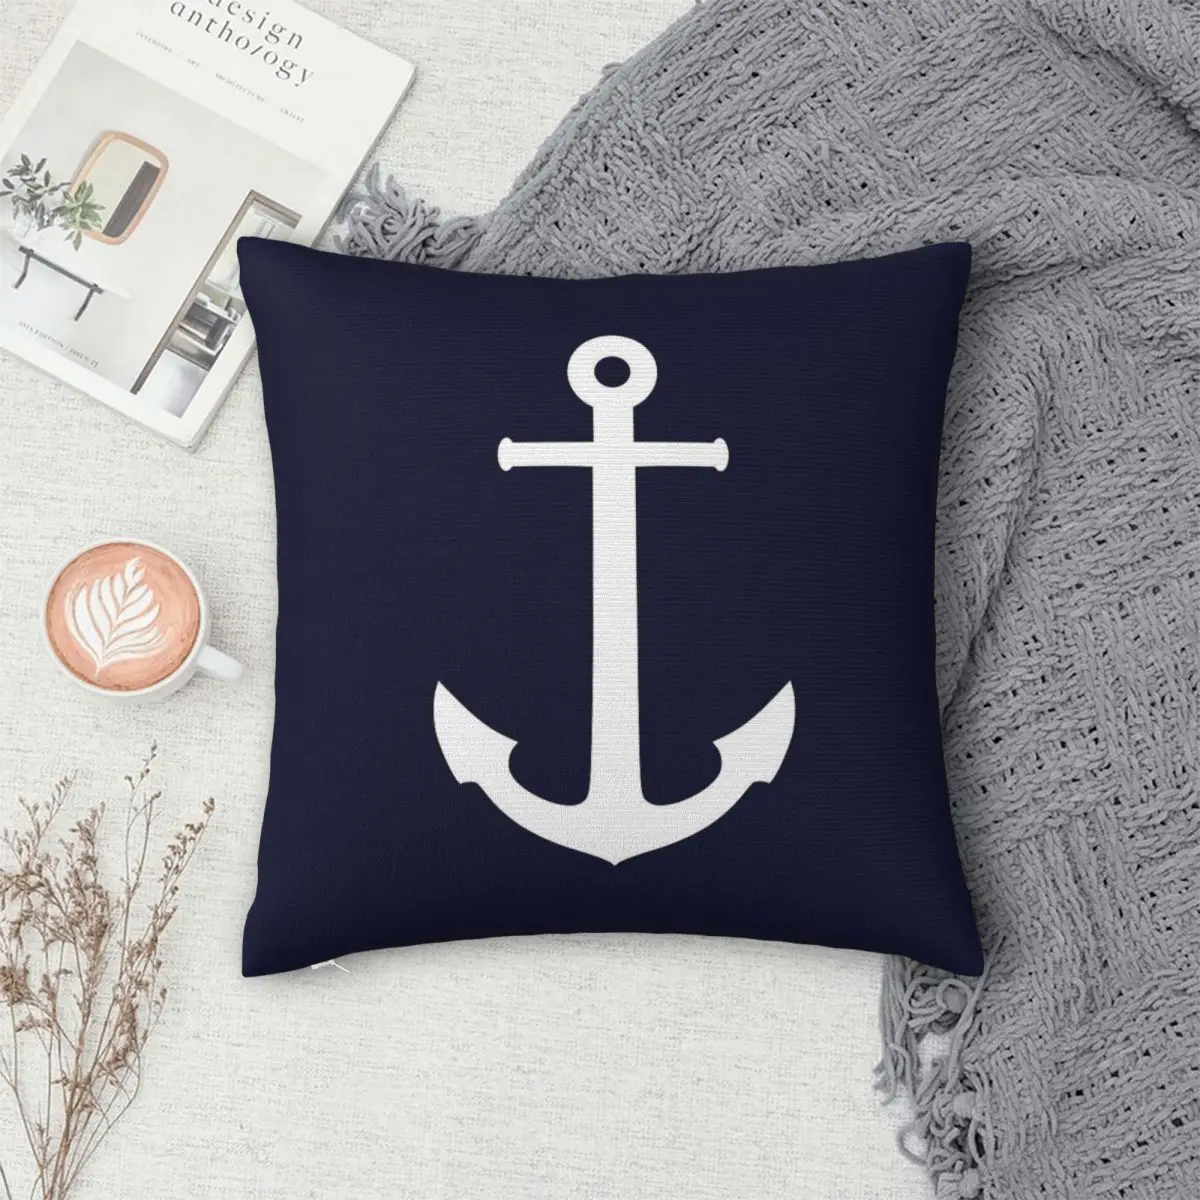 

White Anchor On Navy Blue Pillowcase Polyester Pillows Cover Cushion Comfort Throw Pillow Sofa Decorative Cushions Used for Home